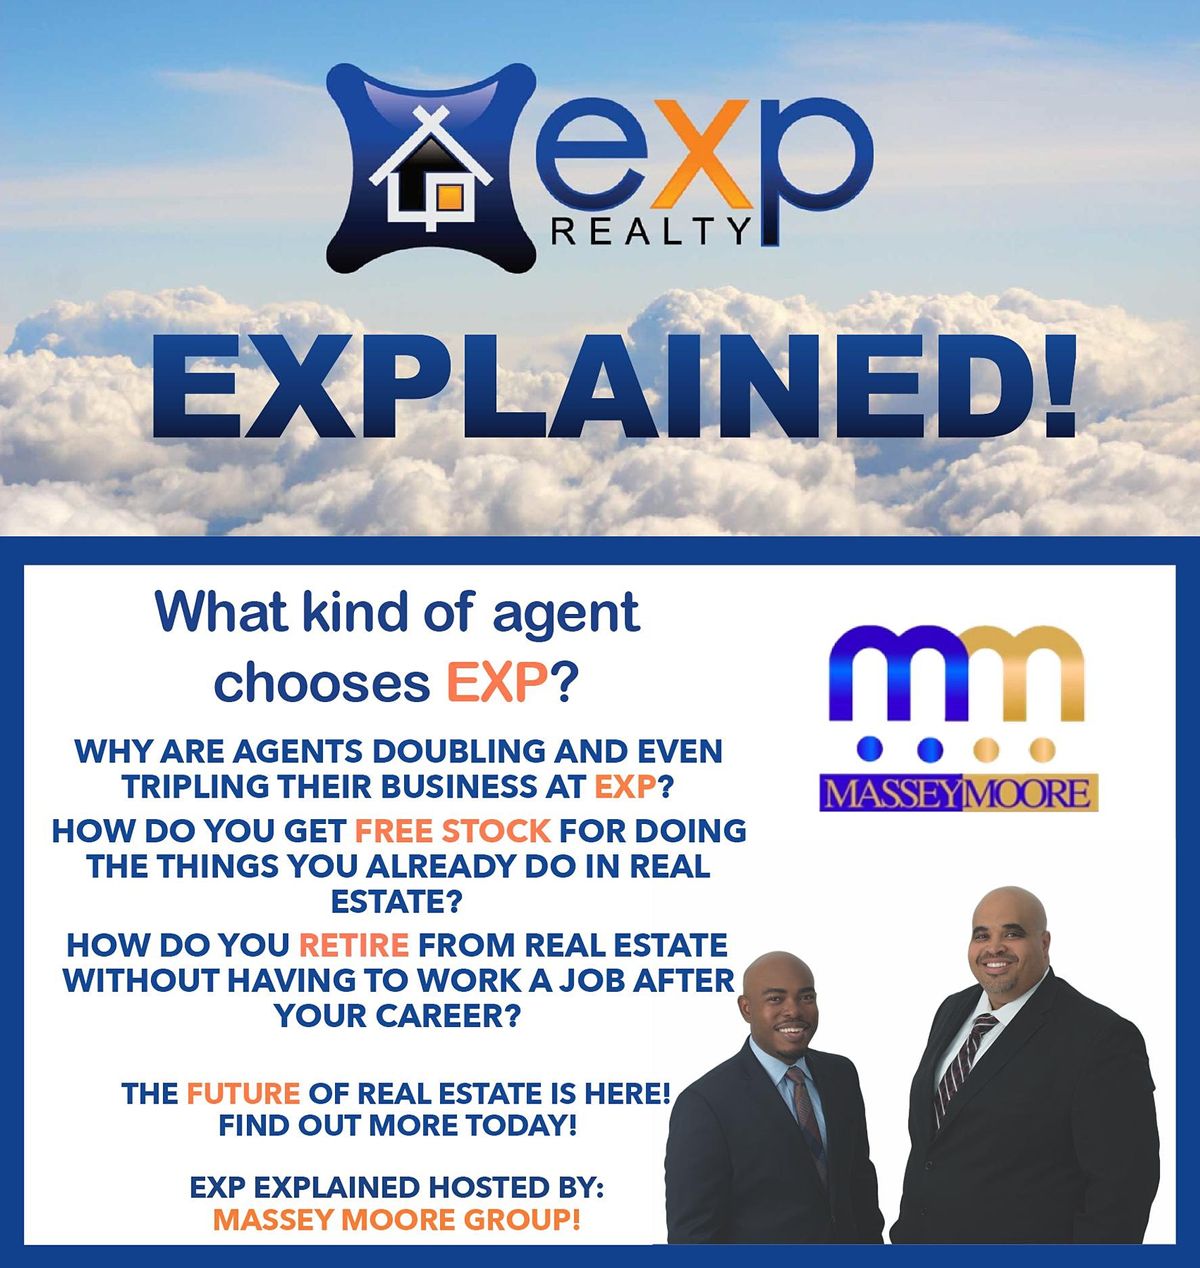 EXP Explained Hosted By: Massey Moore Group 